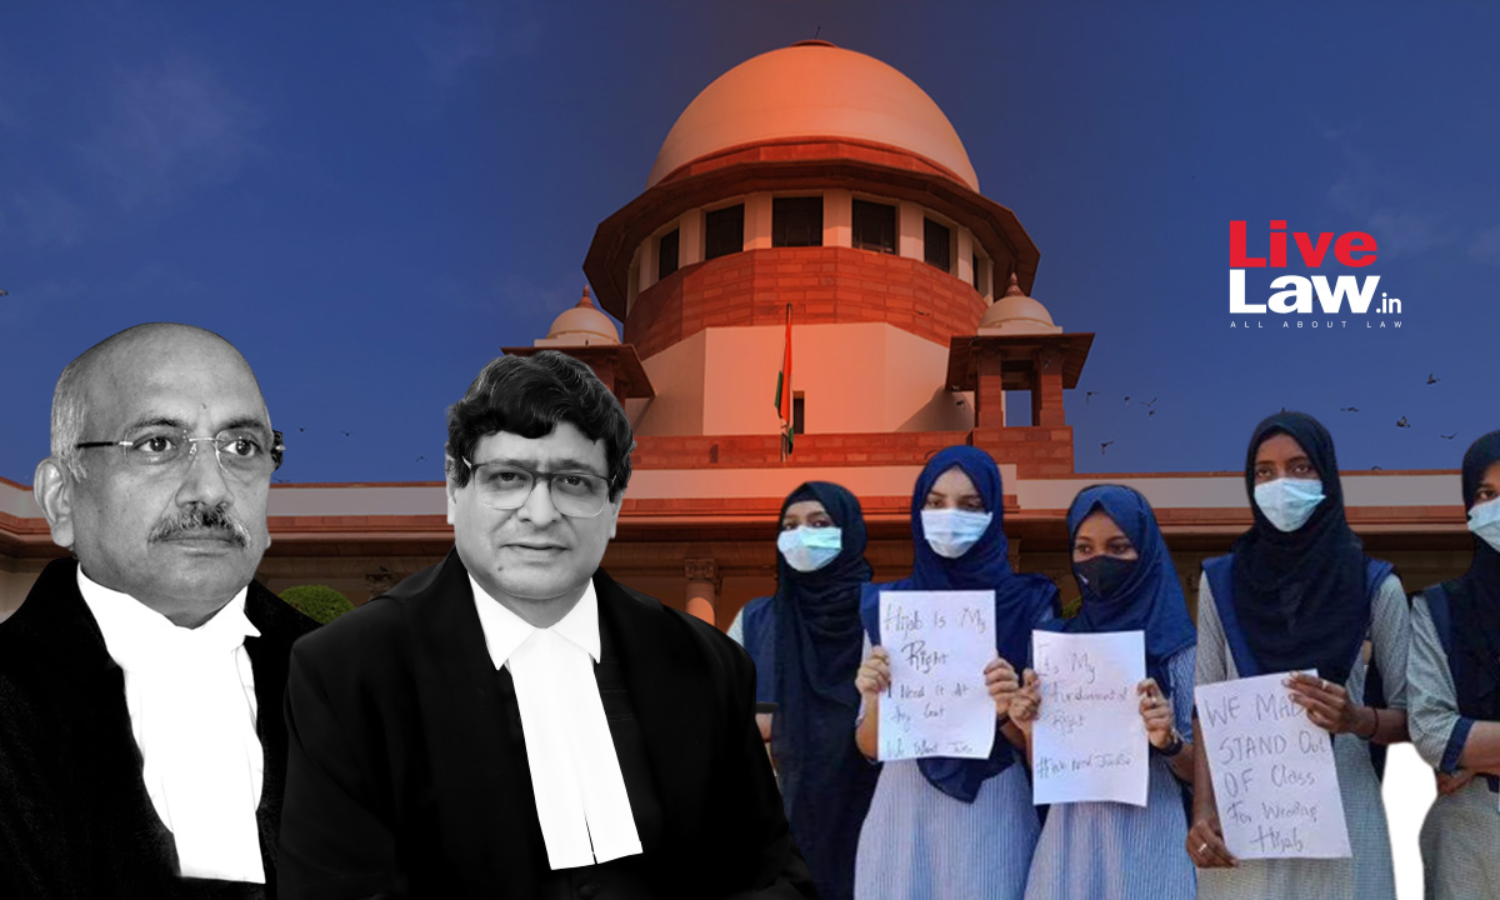 High Court orders probe into harassment of students wearing hijabs